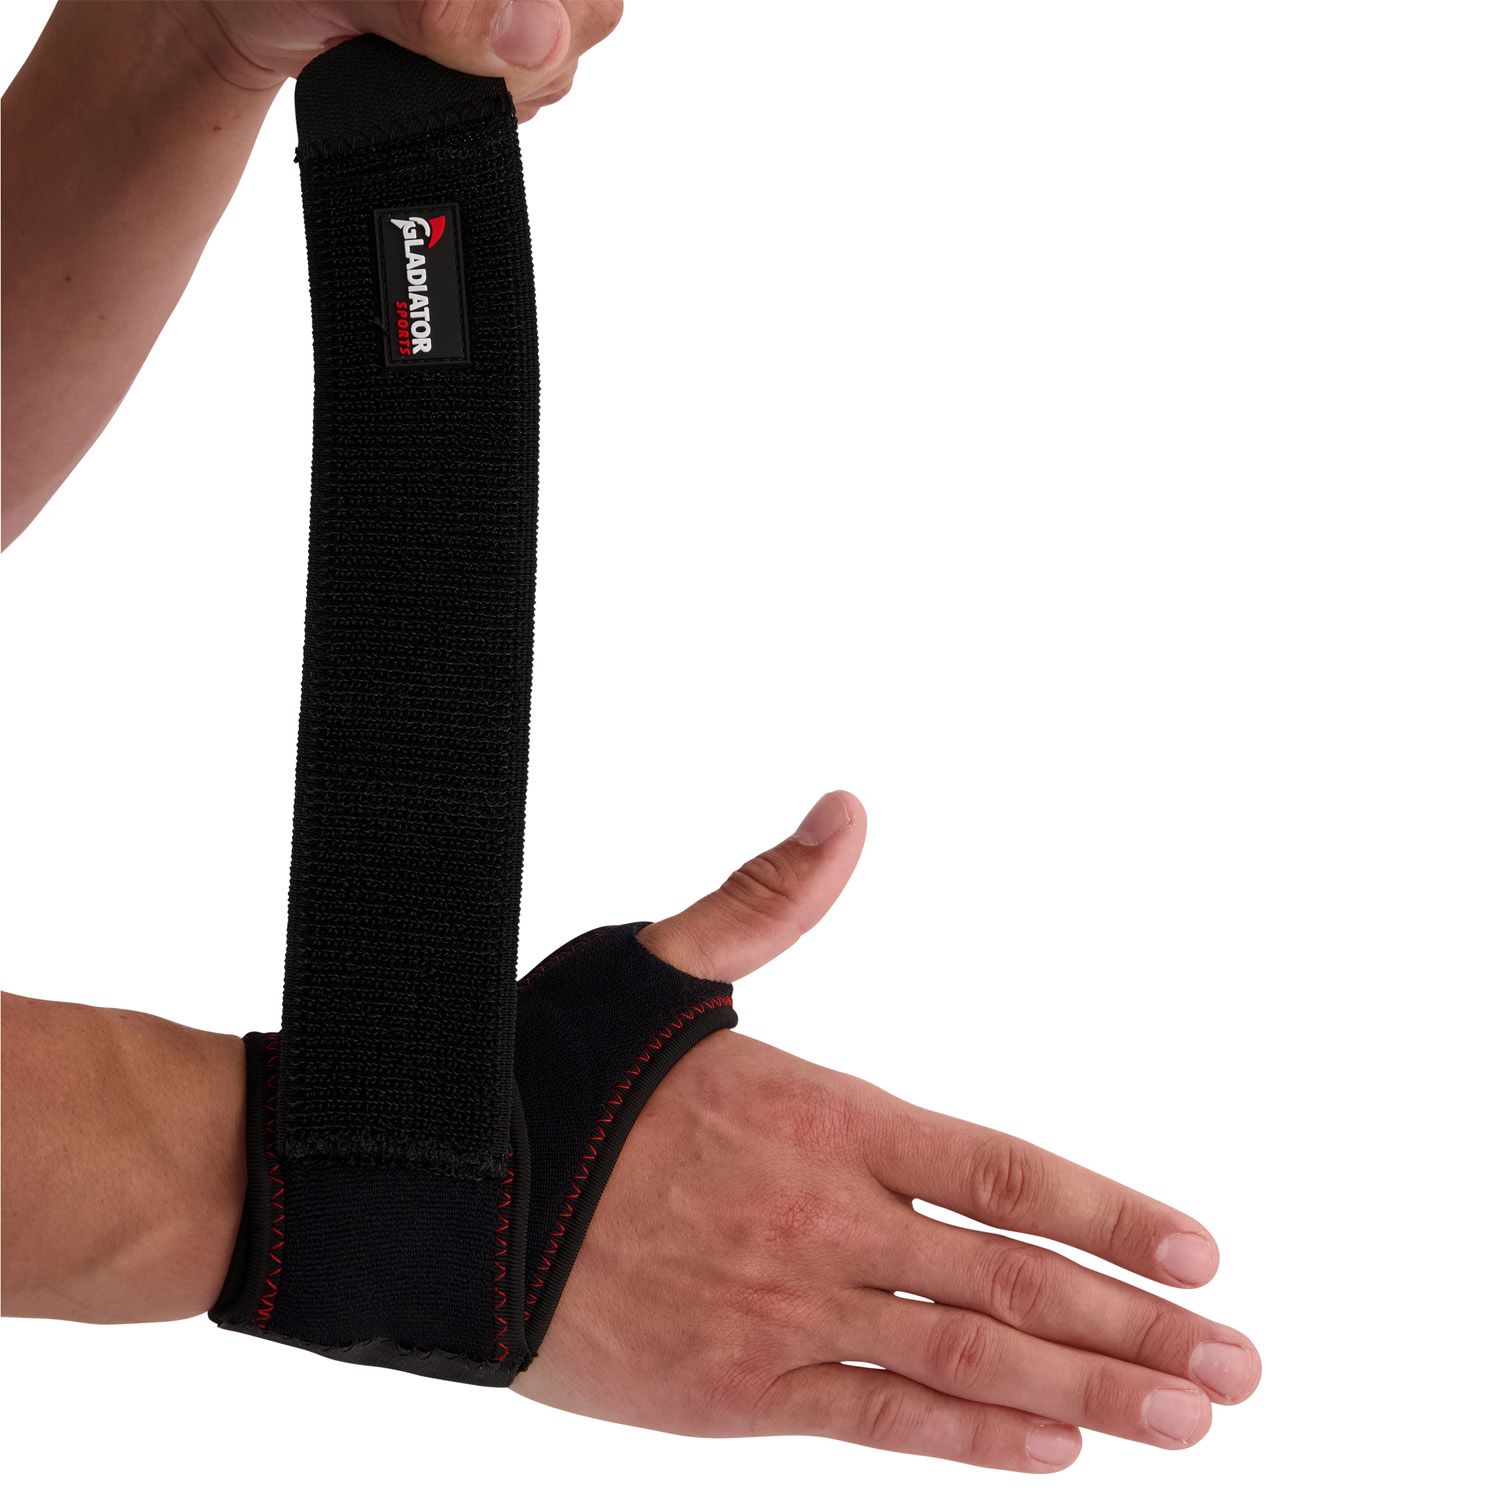 gladiator sports wrist support with thumb opening strap up